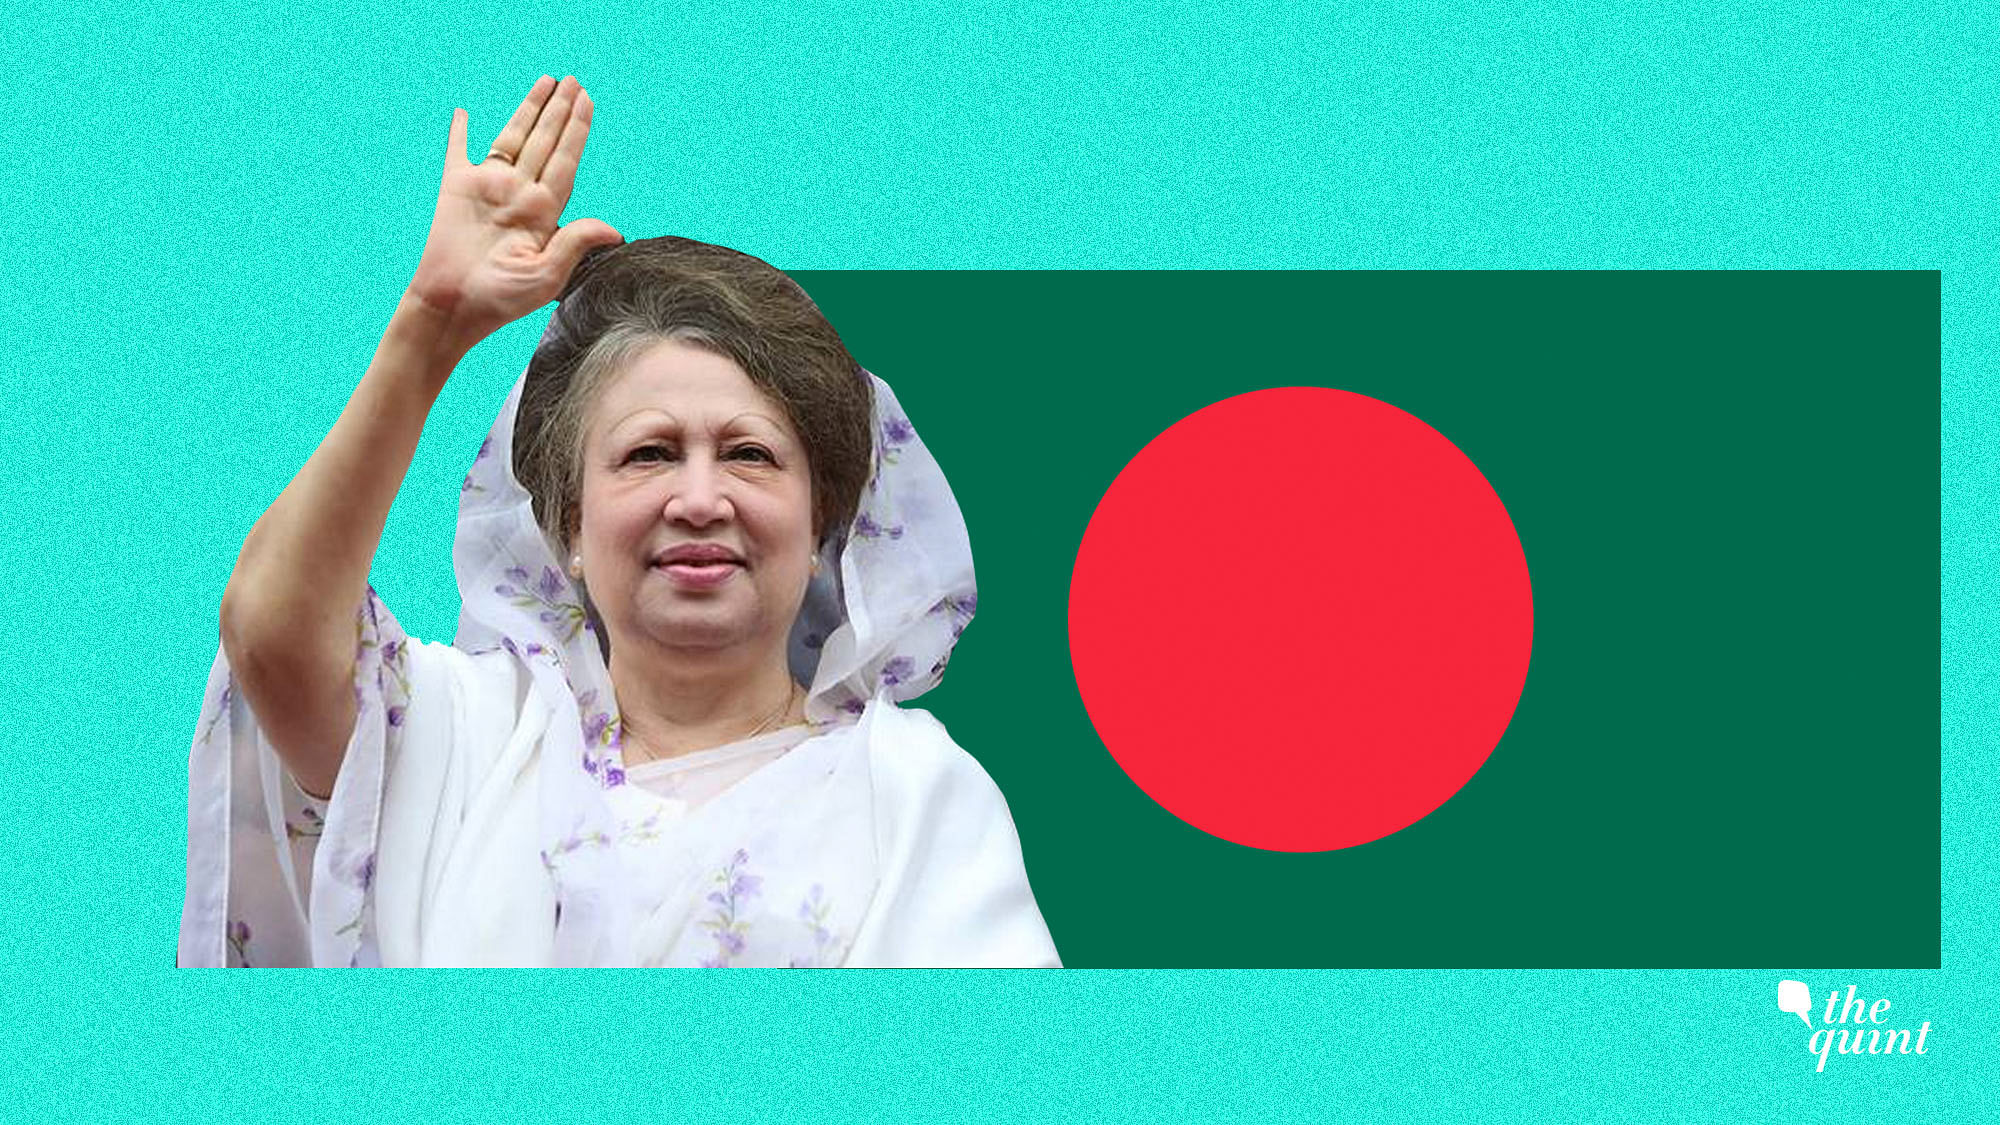 Image of former Prime Minister of Bangladesh, Begum Zia, who has been jailed, used for representational purposes.